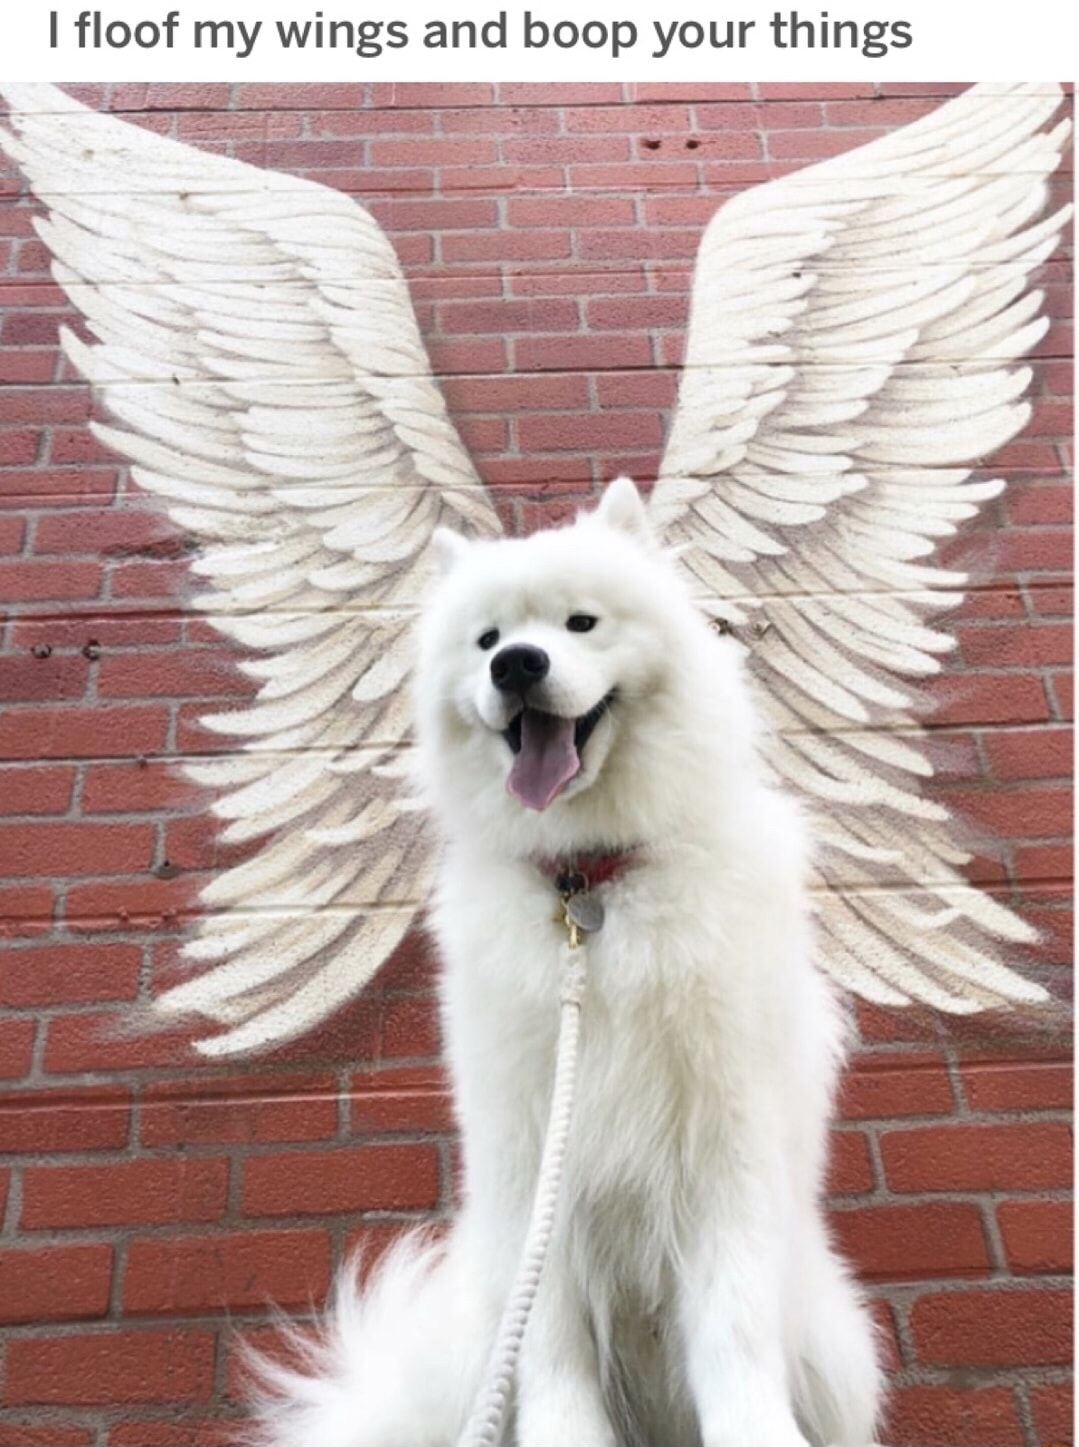 floof my wings and boop your things - I floof my wings and boop your things